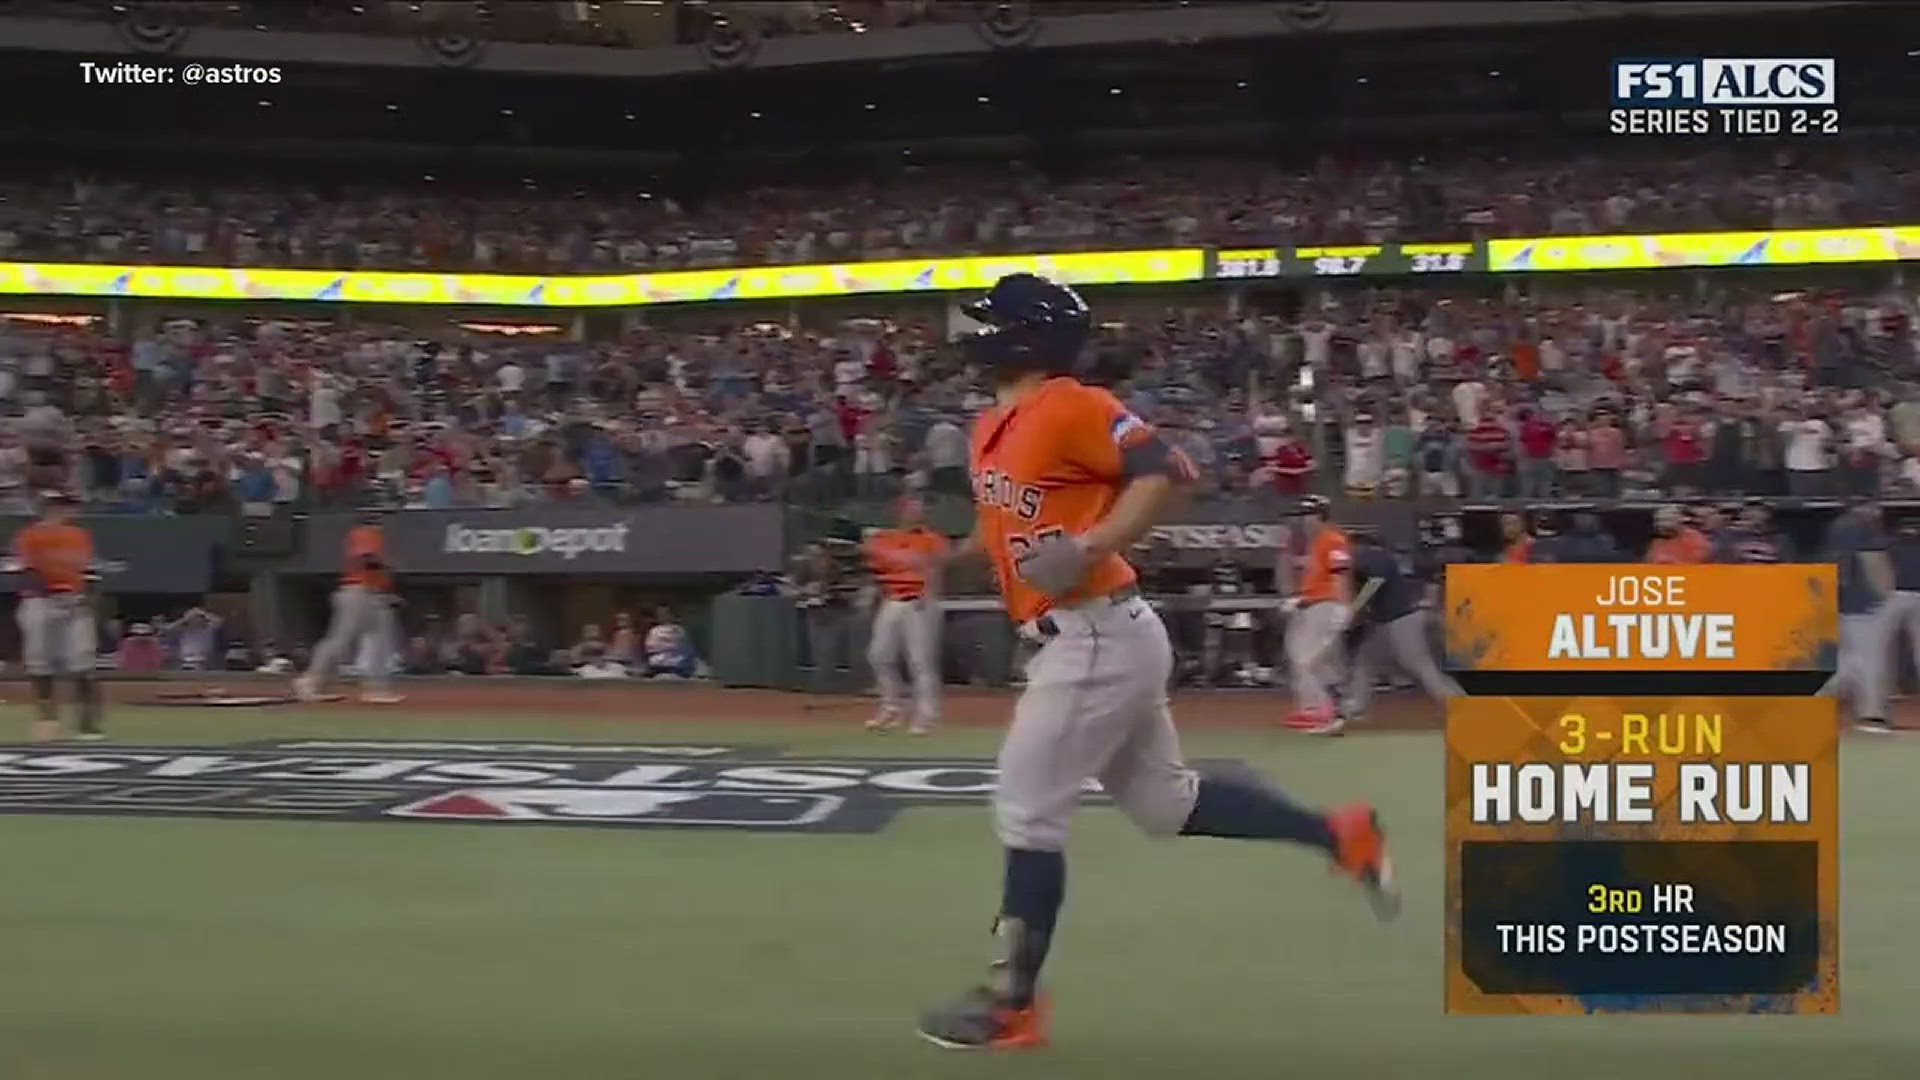 The Houston Astros have won three games in a row